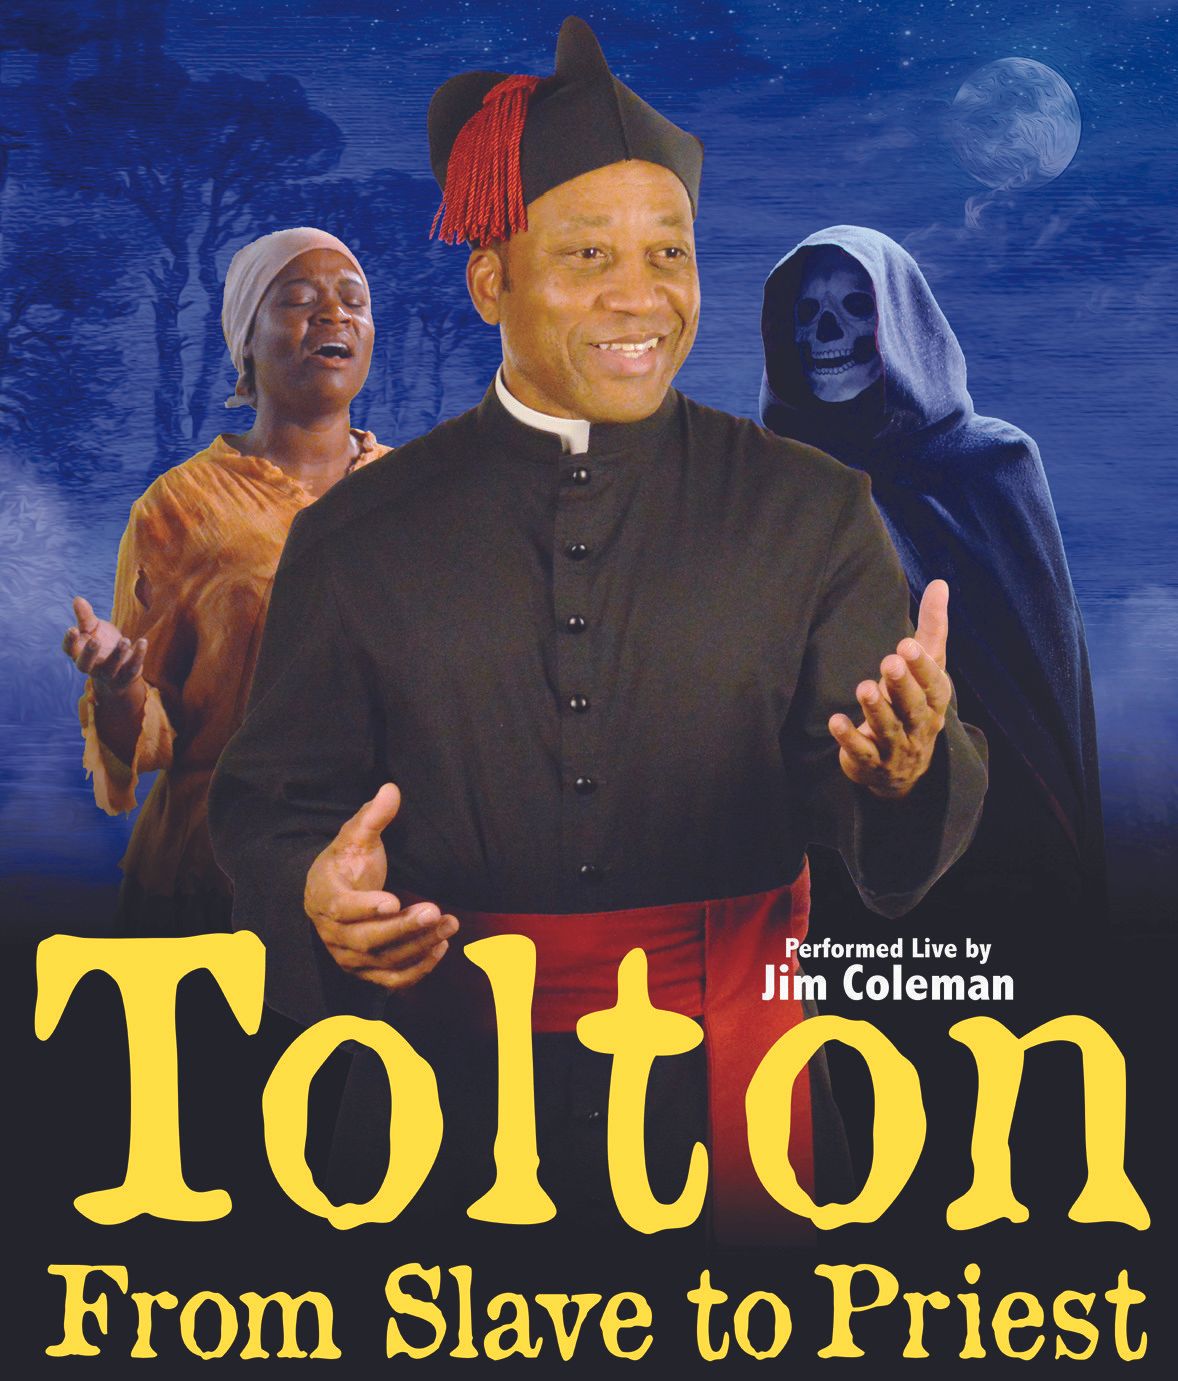 One-man show on Venerable Augustus Tolton touring once again